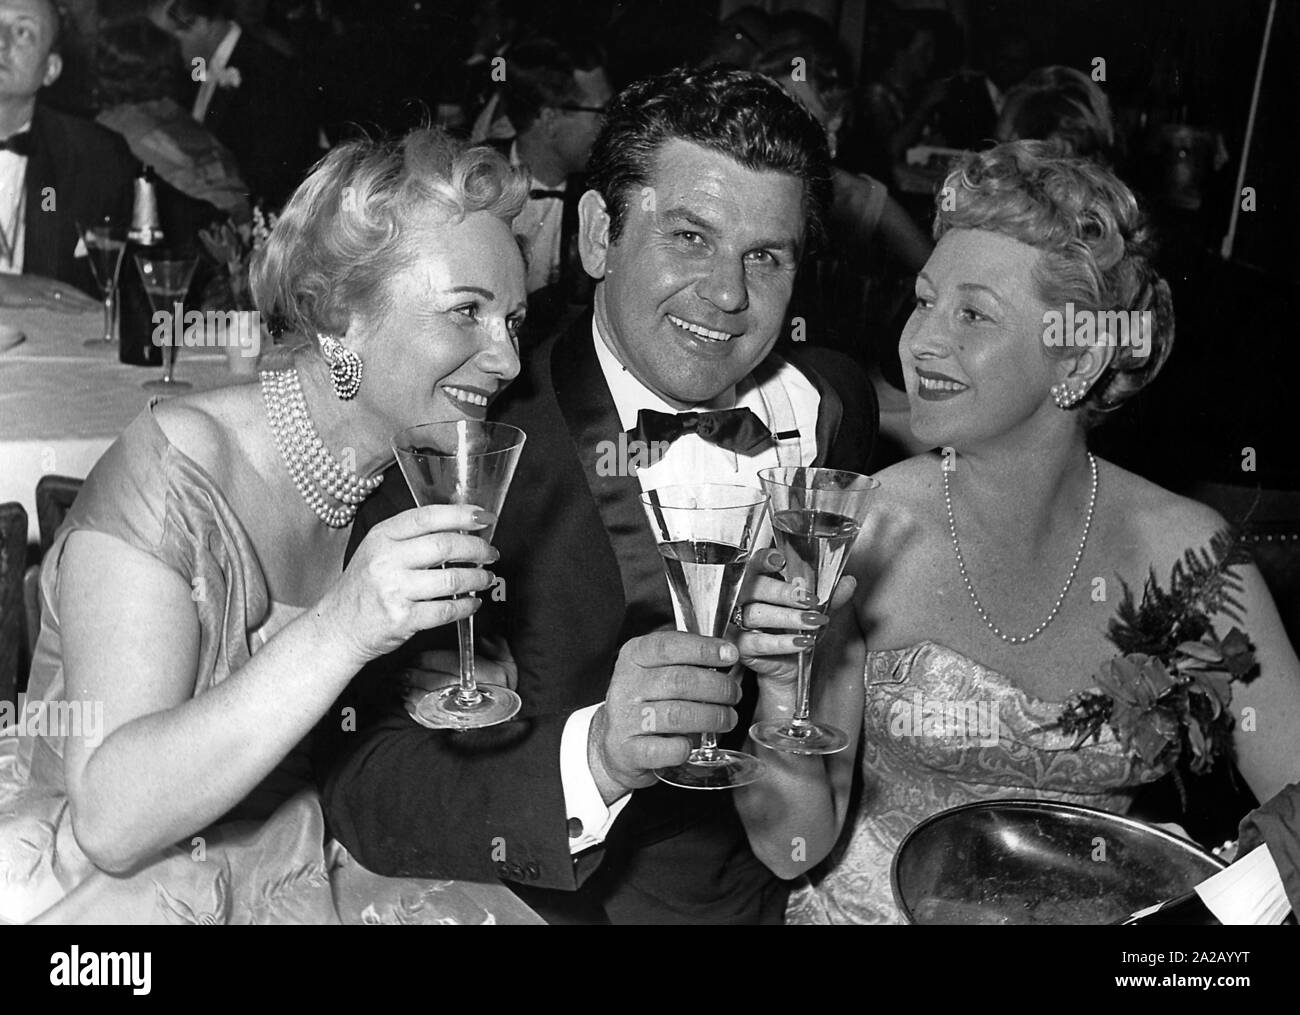 From left to right: actress Vera Kalman, opera singer Franz Klarwein, and his wife, the opera singer Sari Barabas, at the bal pare of the Muenchner Illustrierte. Stock Photo